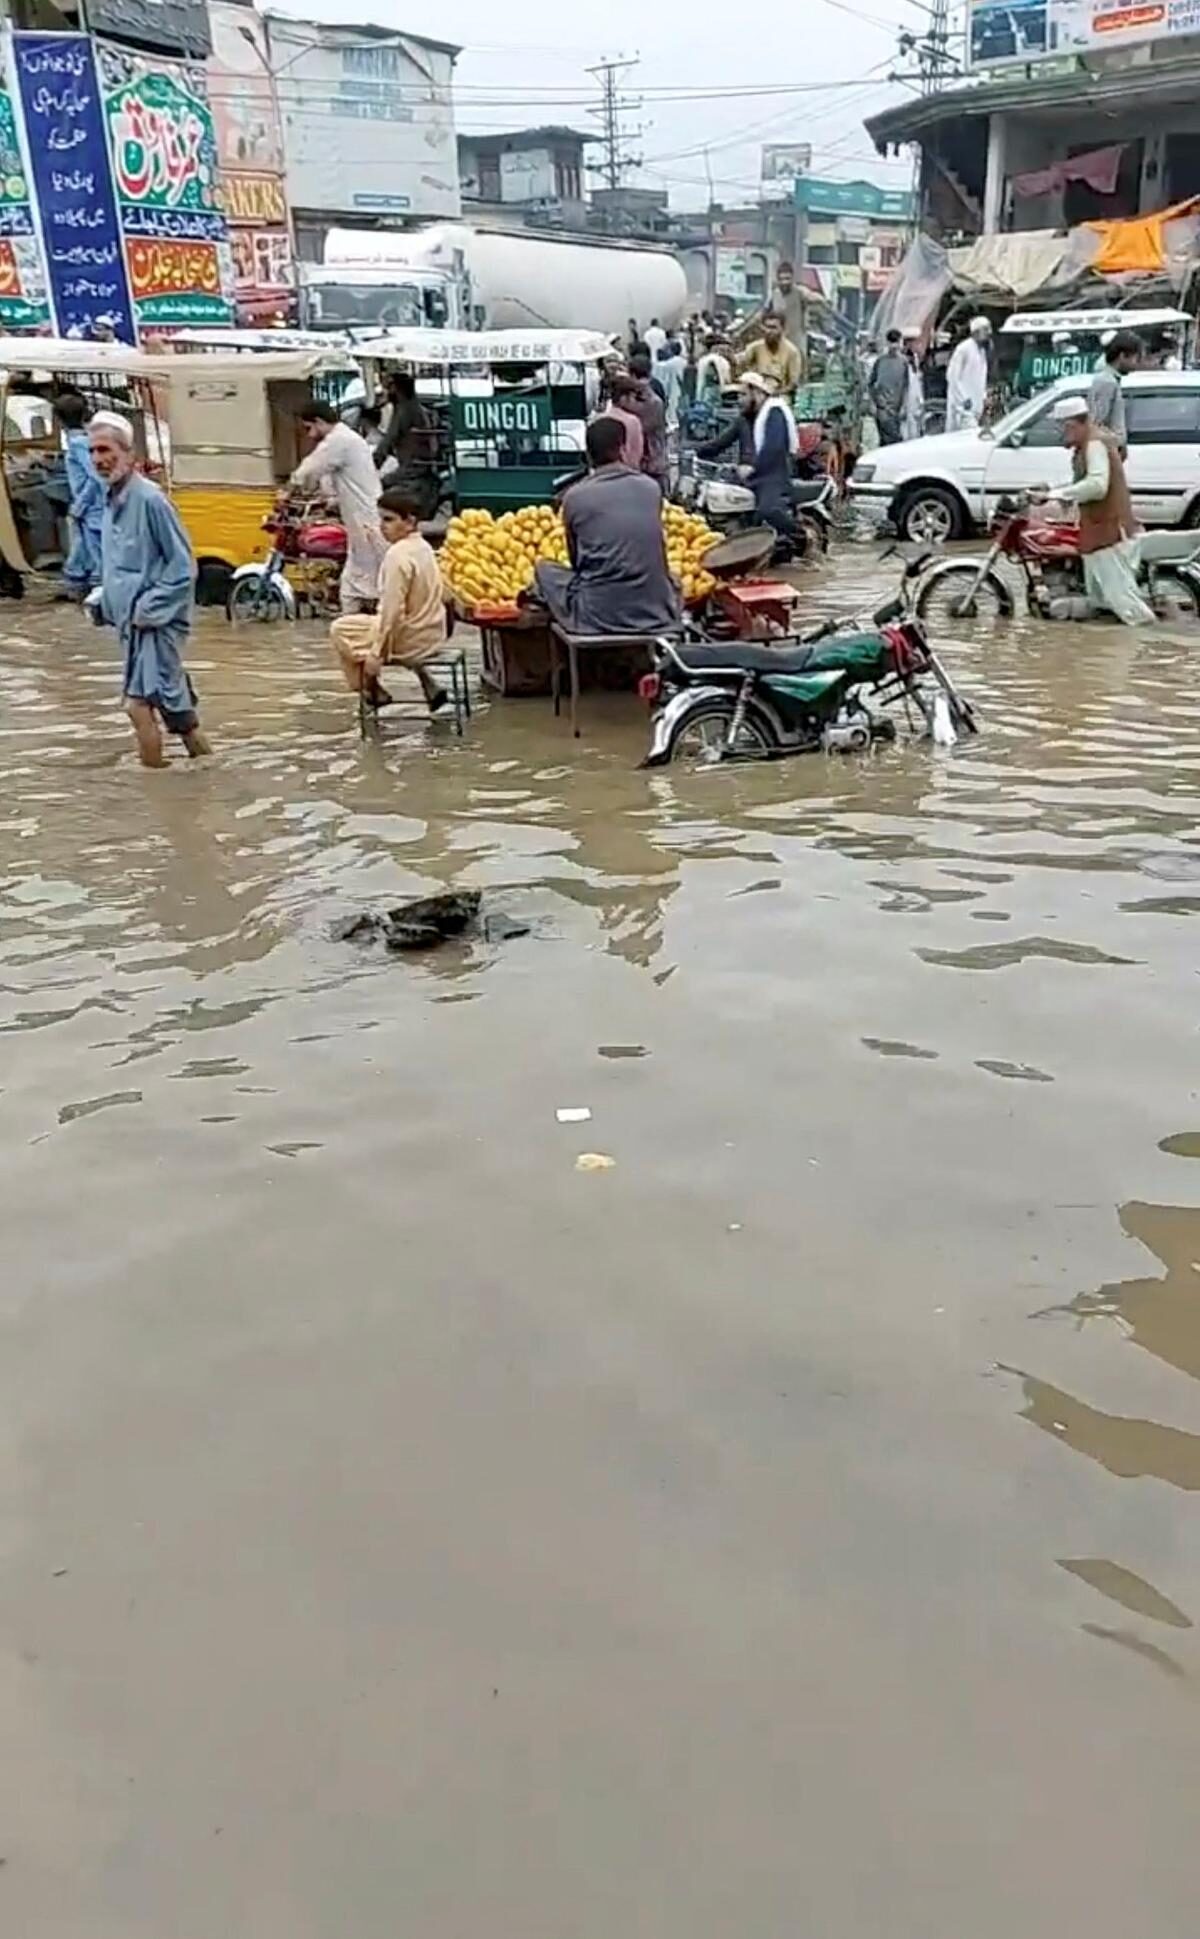 People and vehicles move around a flooded market in Charsadda, Pakistan on July 30, 2022 in this screengrab obtained from social media video.